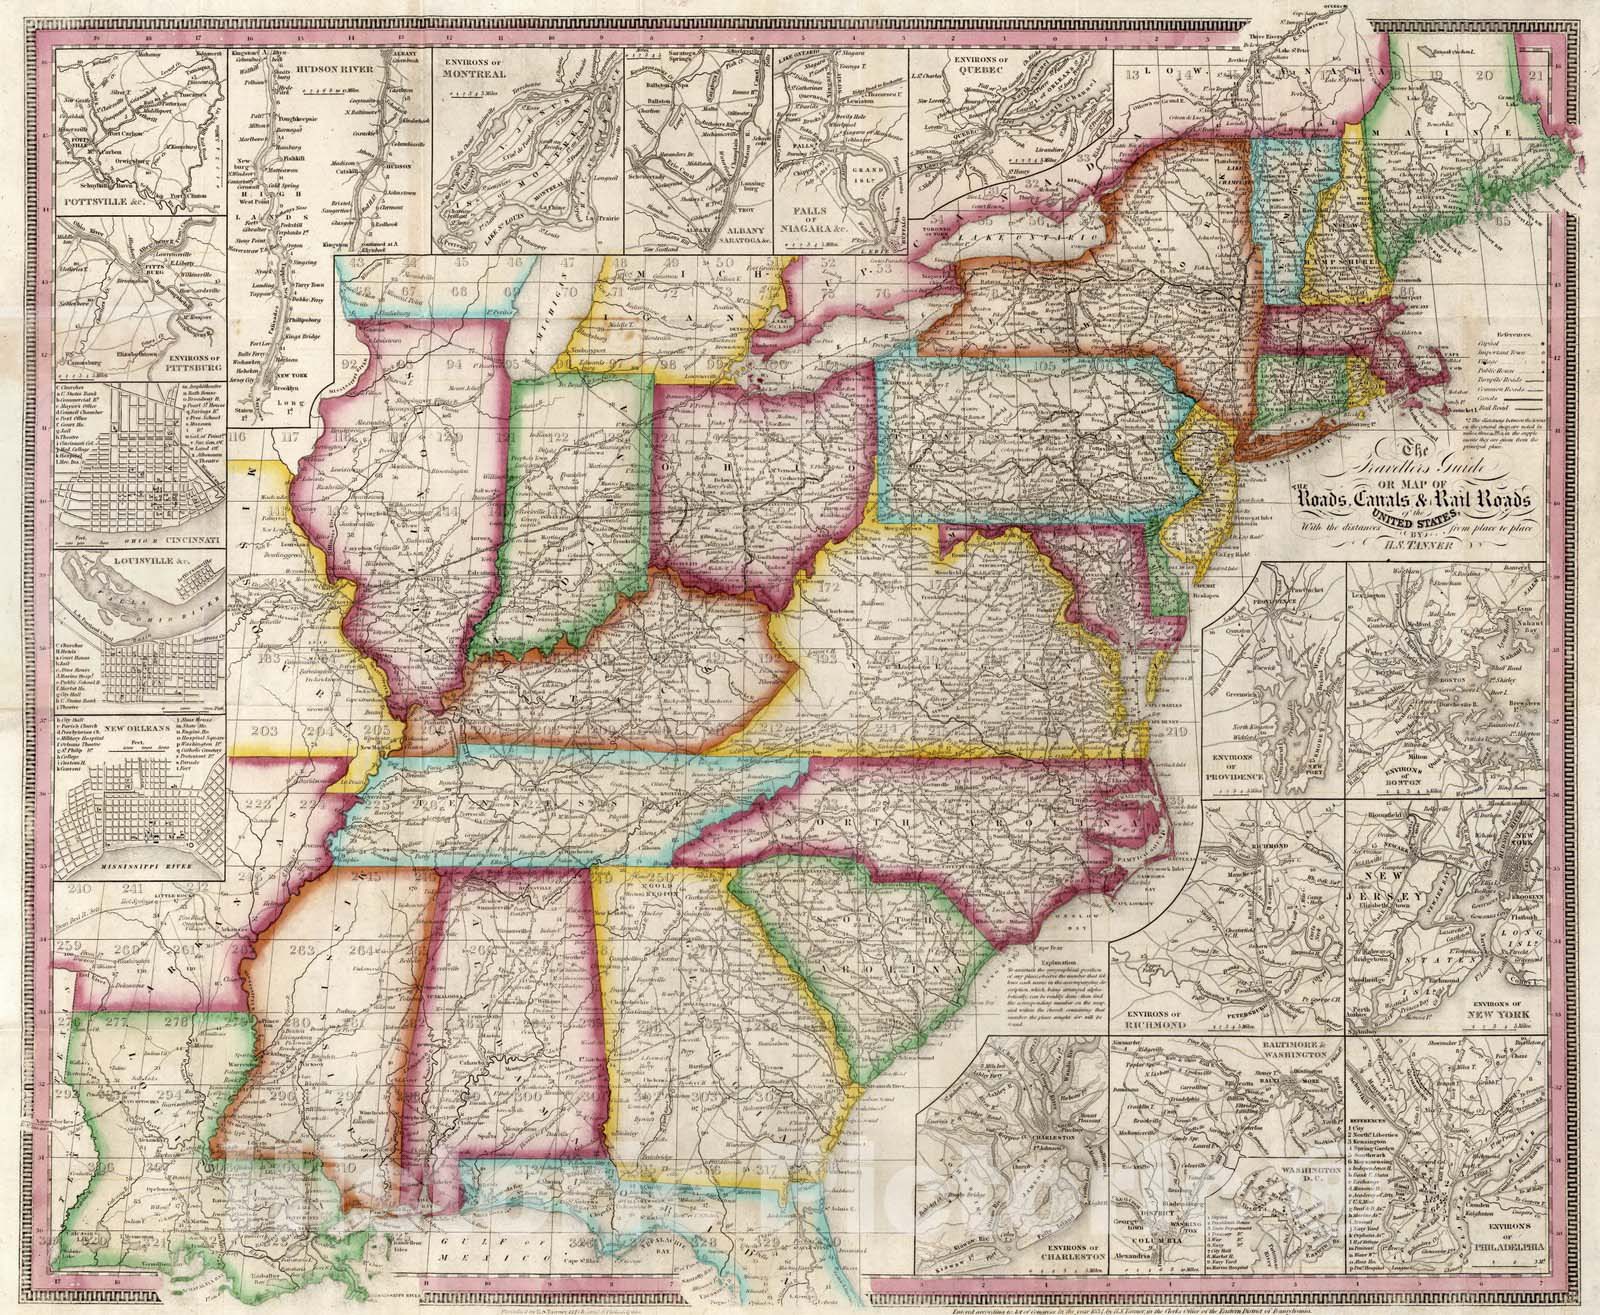 Historic Map : Map of The Roads, Canals & Rail Roads of the United States, 1839 - Vintage Wall Art